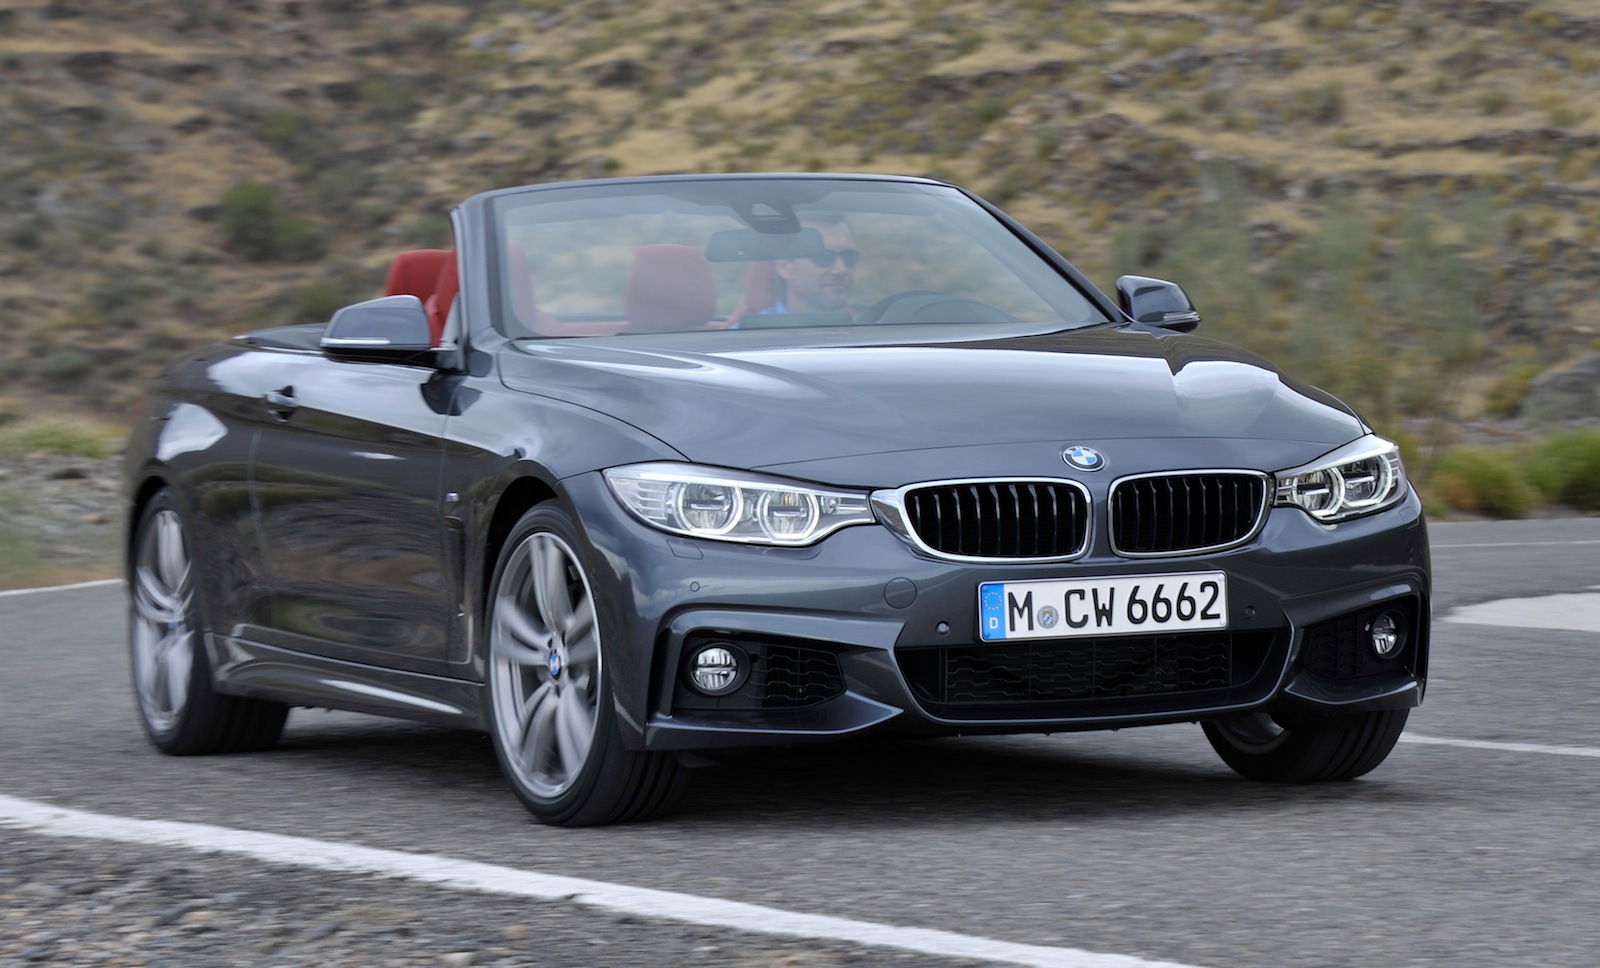 Amazing BMW 4 Series Convertible Pictures & Backgrounds